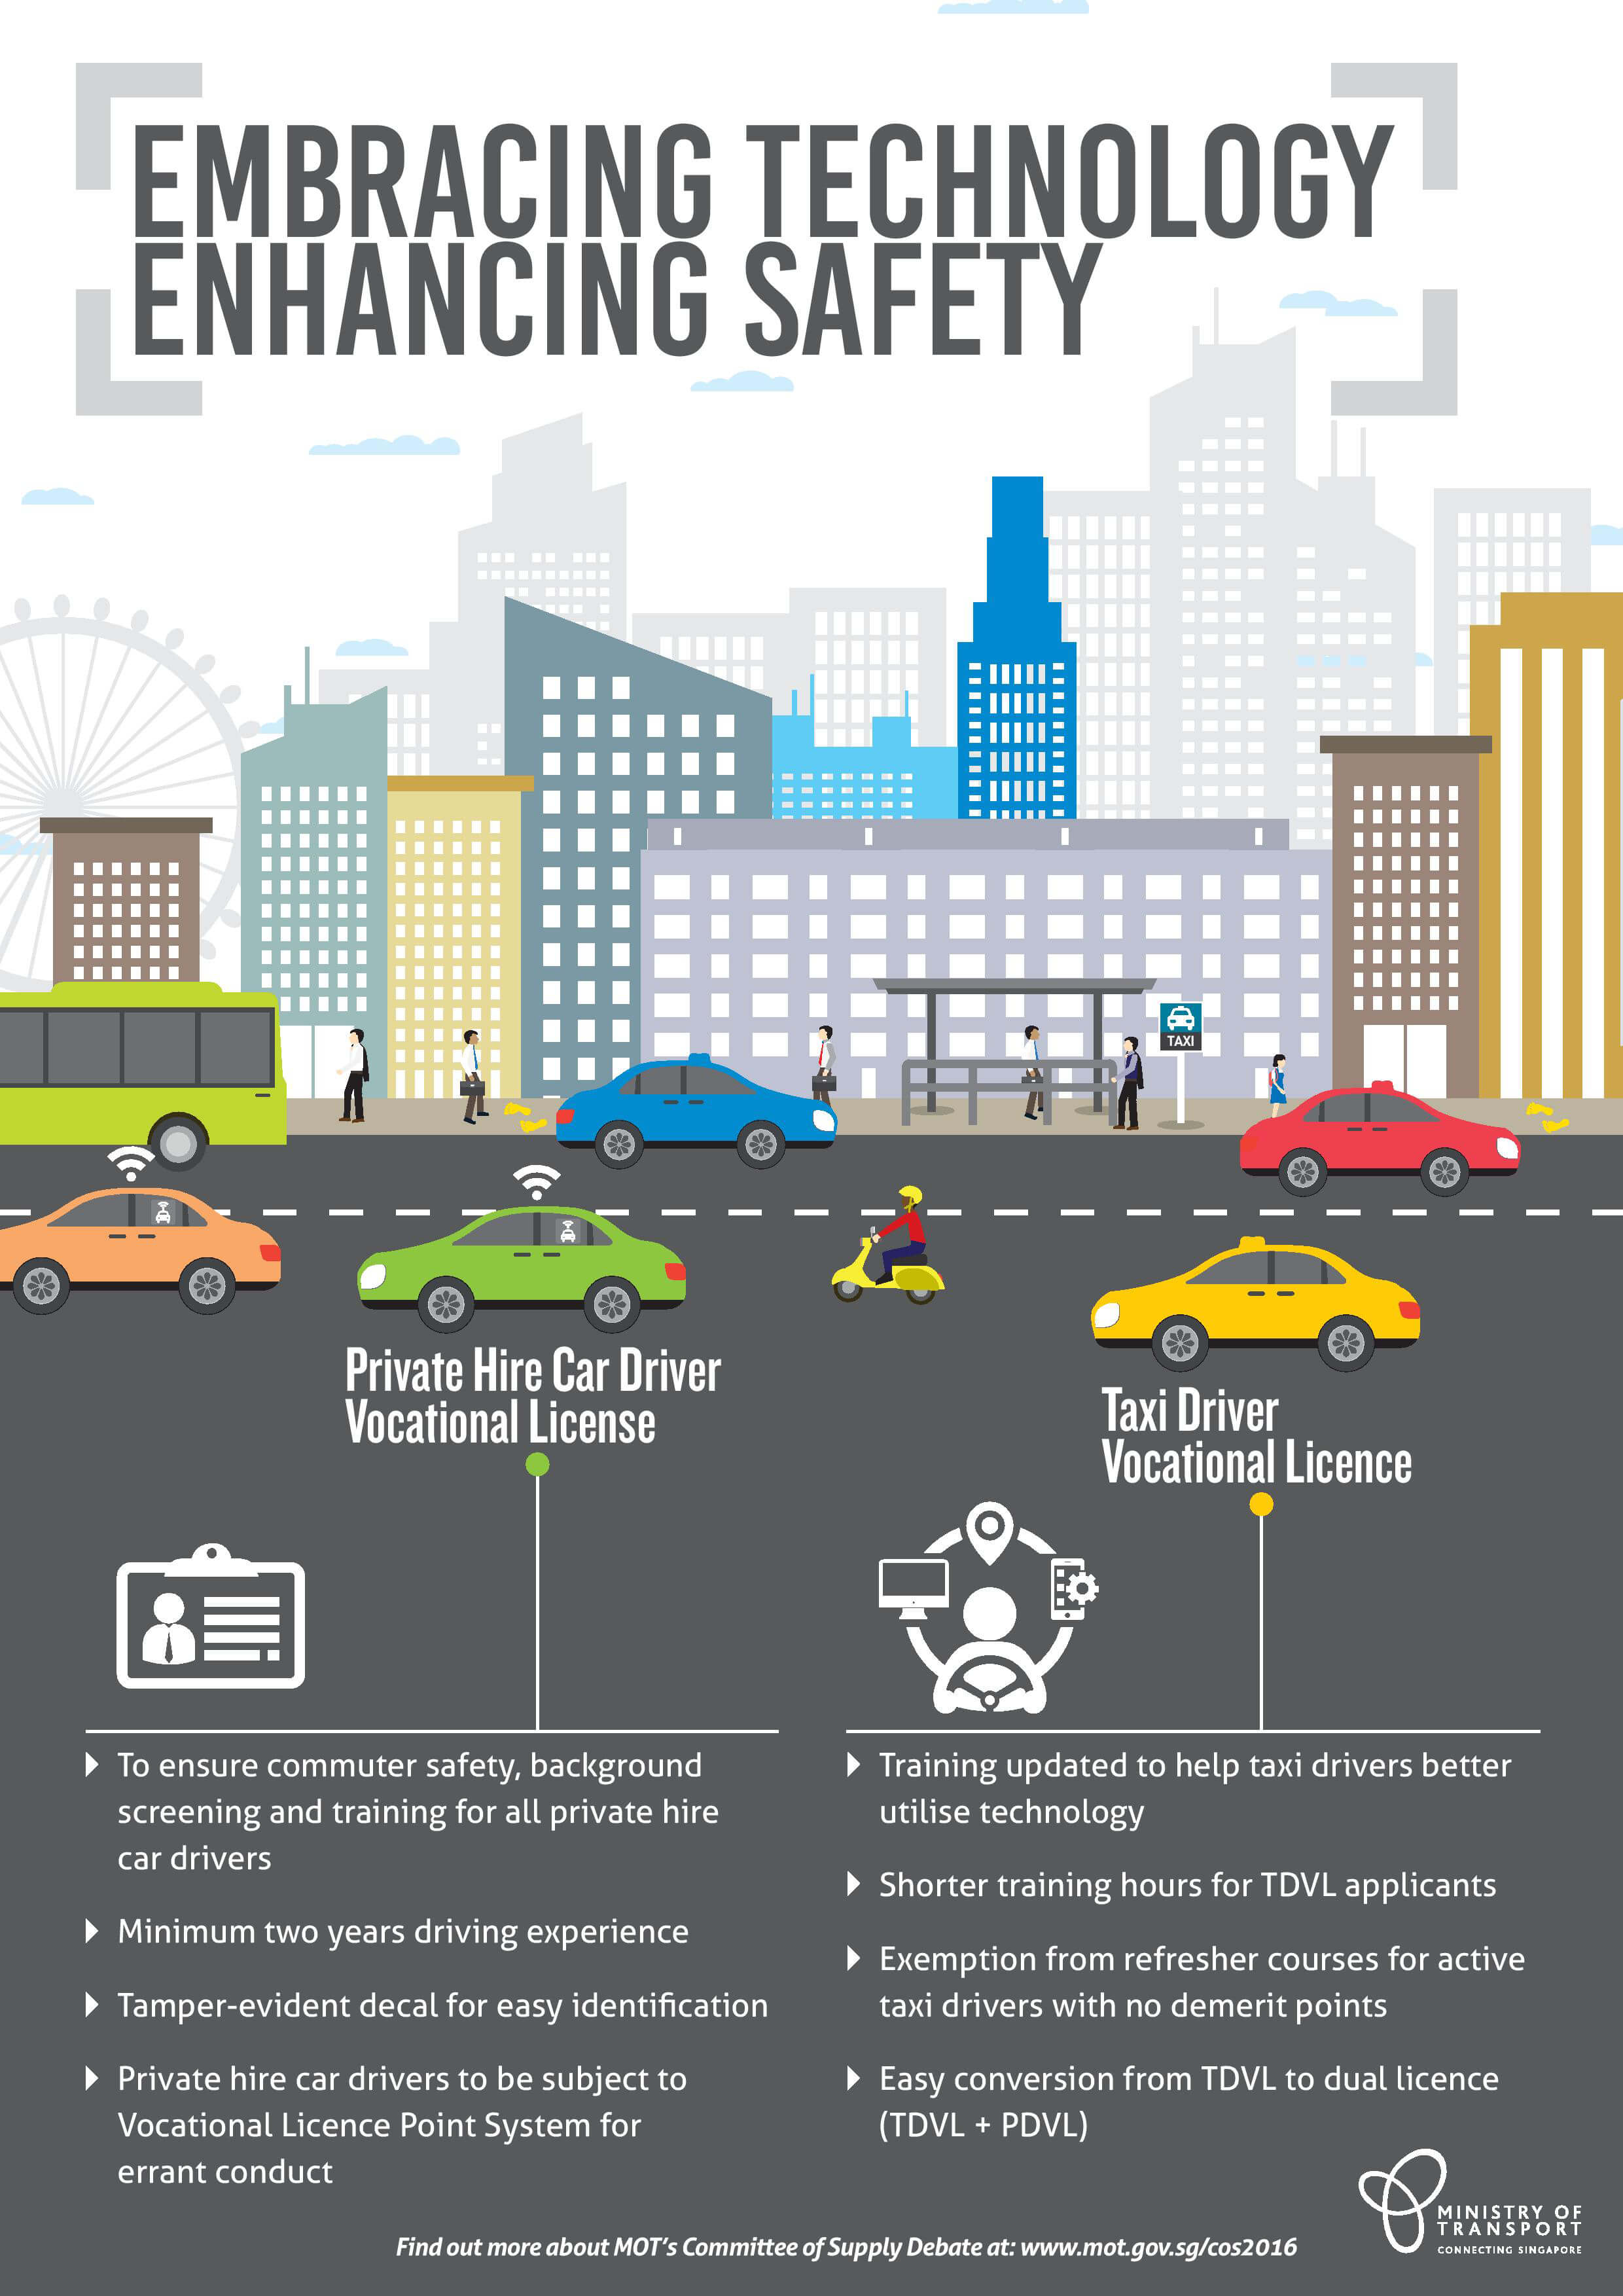 Embracing Technology Enhancing Safety Infographic